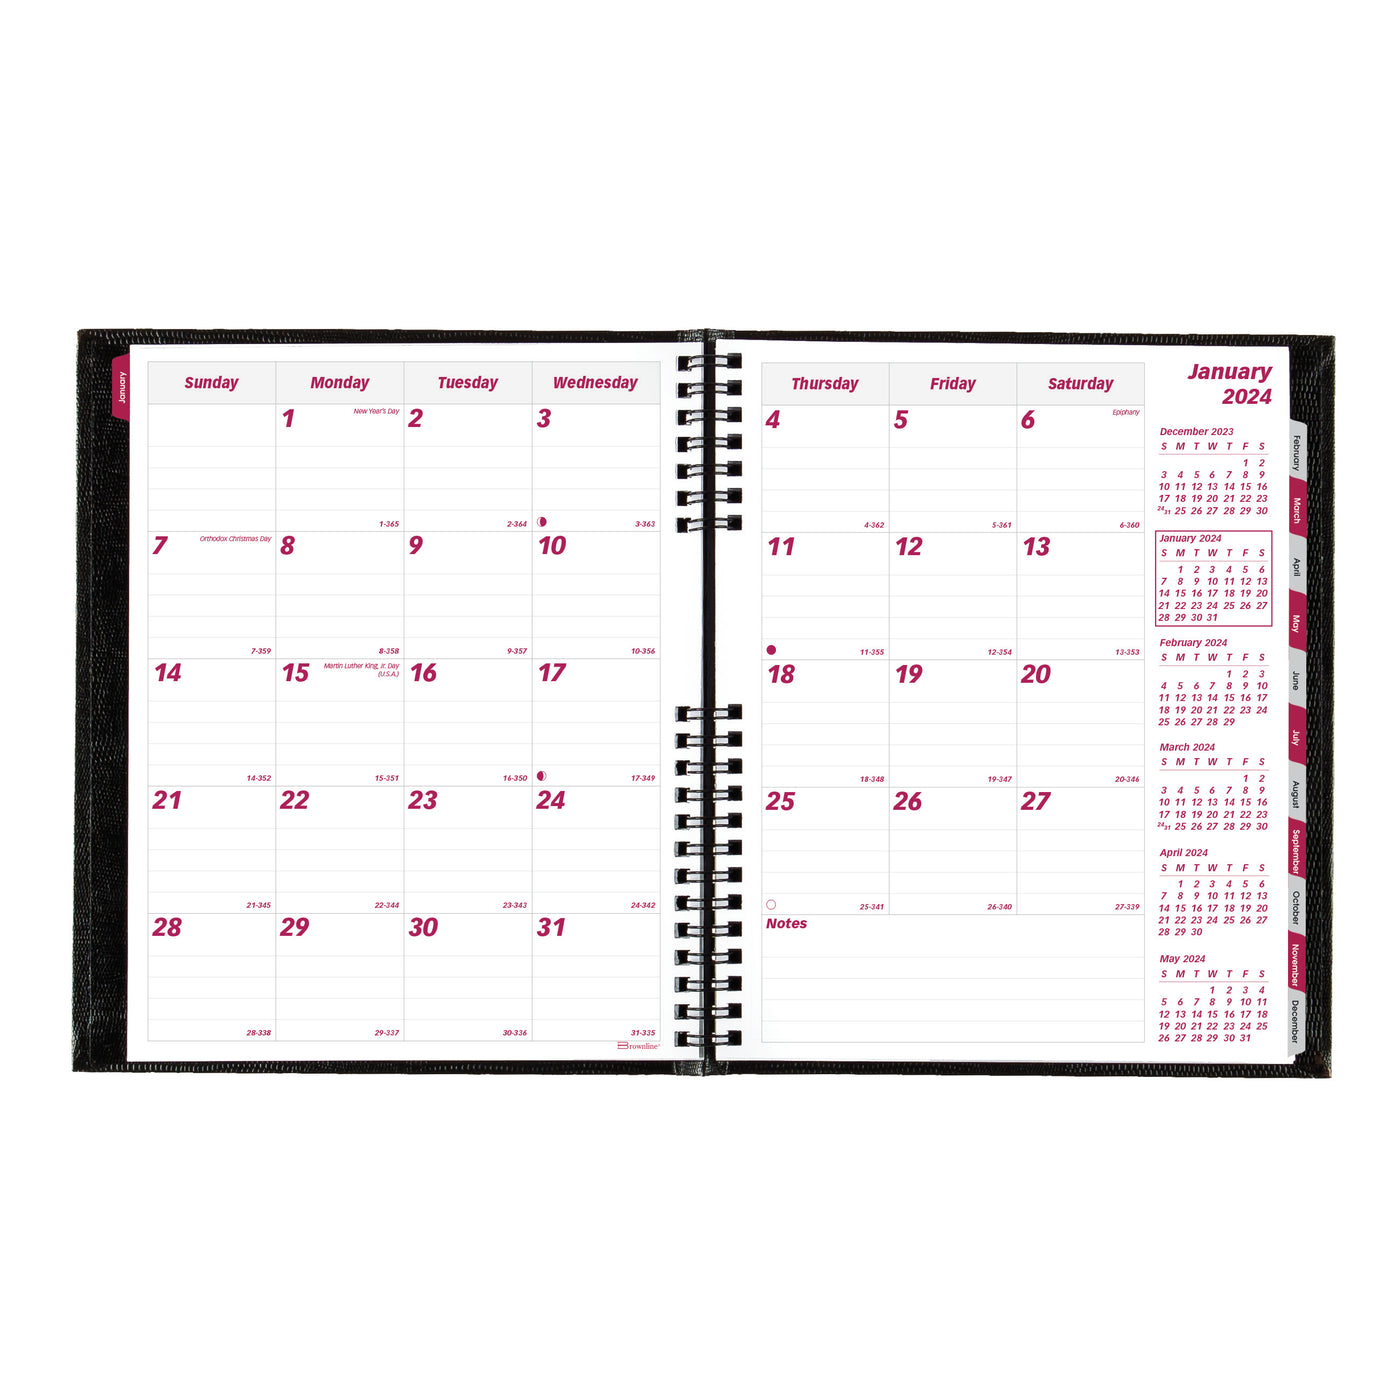 Brownline Coilpro Monthly Planner - 8 7/8" x 7 1/8" - Black Cover